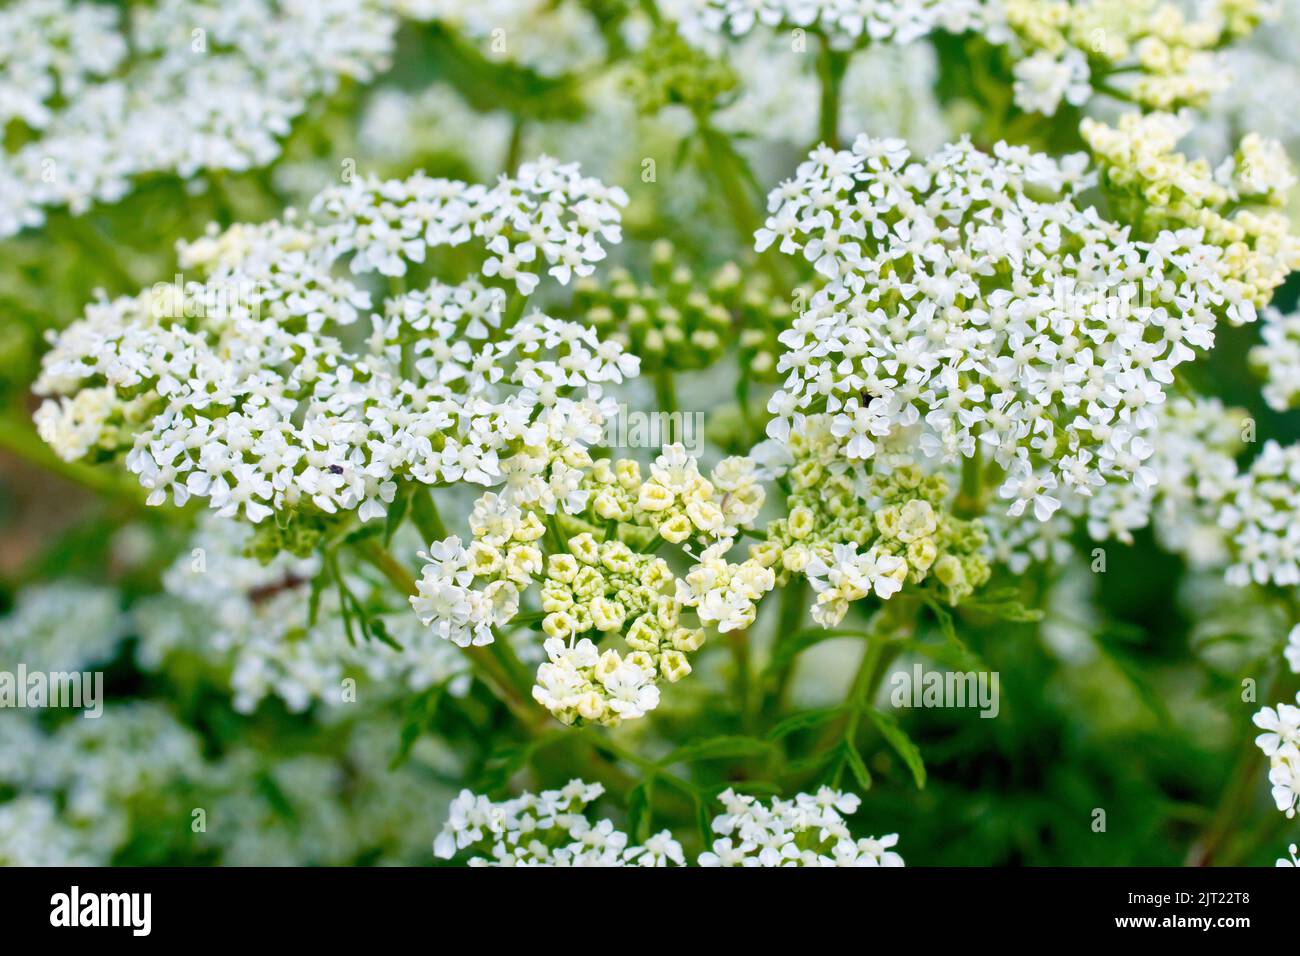 Hemlock (conium maculatum), close up showing the many small white flowers that make up the individual umbels of the plant. Stock Photo